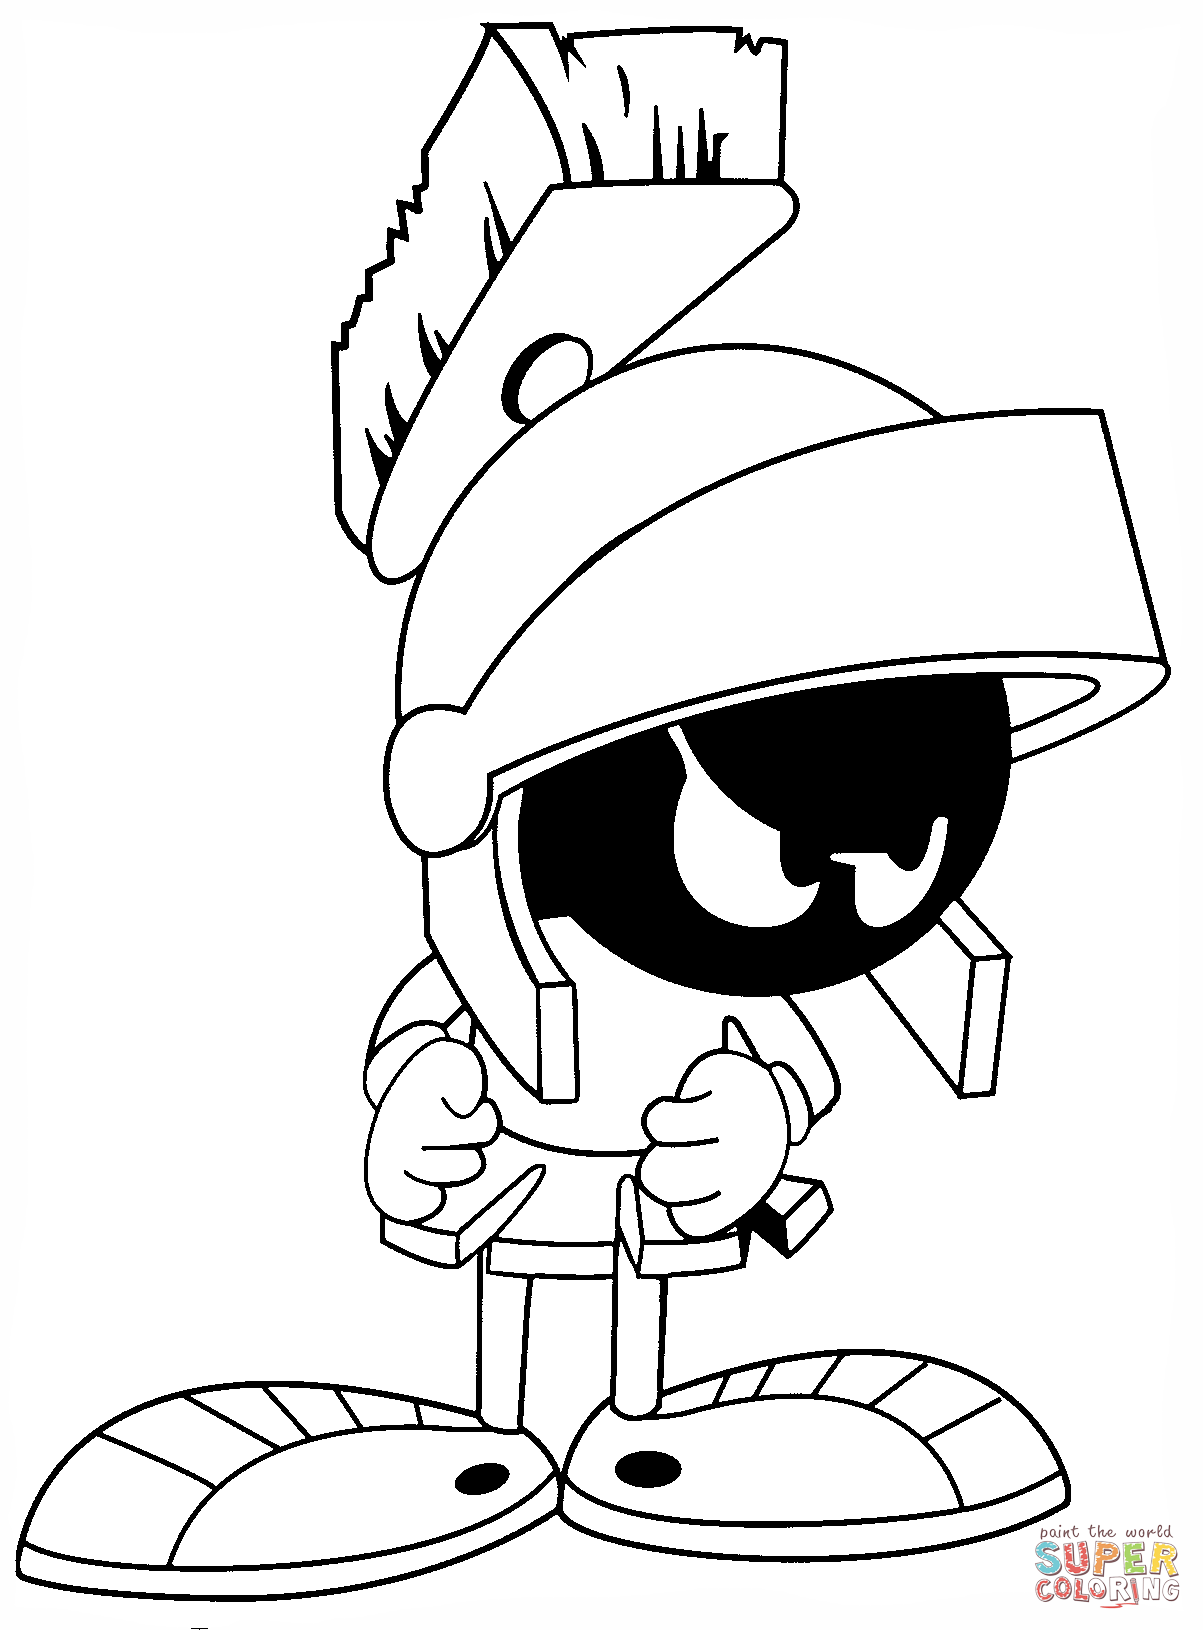 Looney Tunes Marvin the Martian coloring page Free Printable.